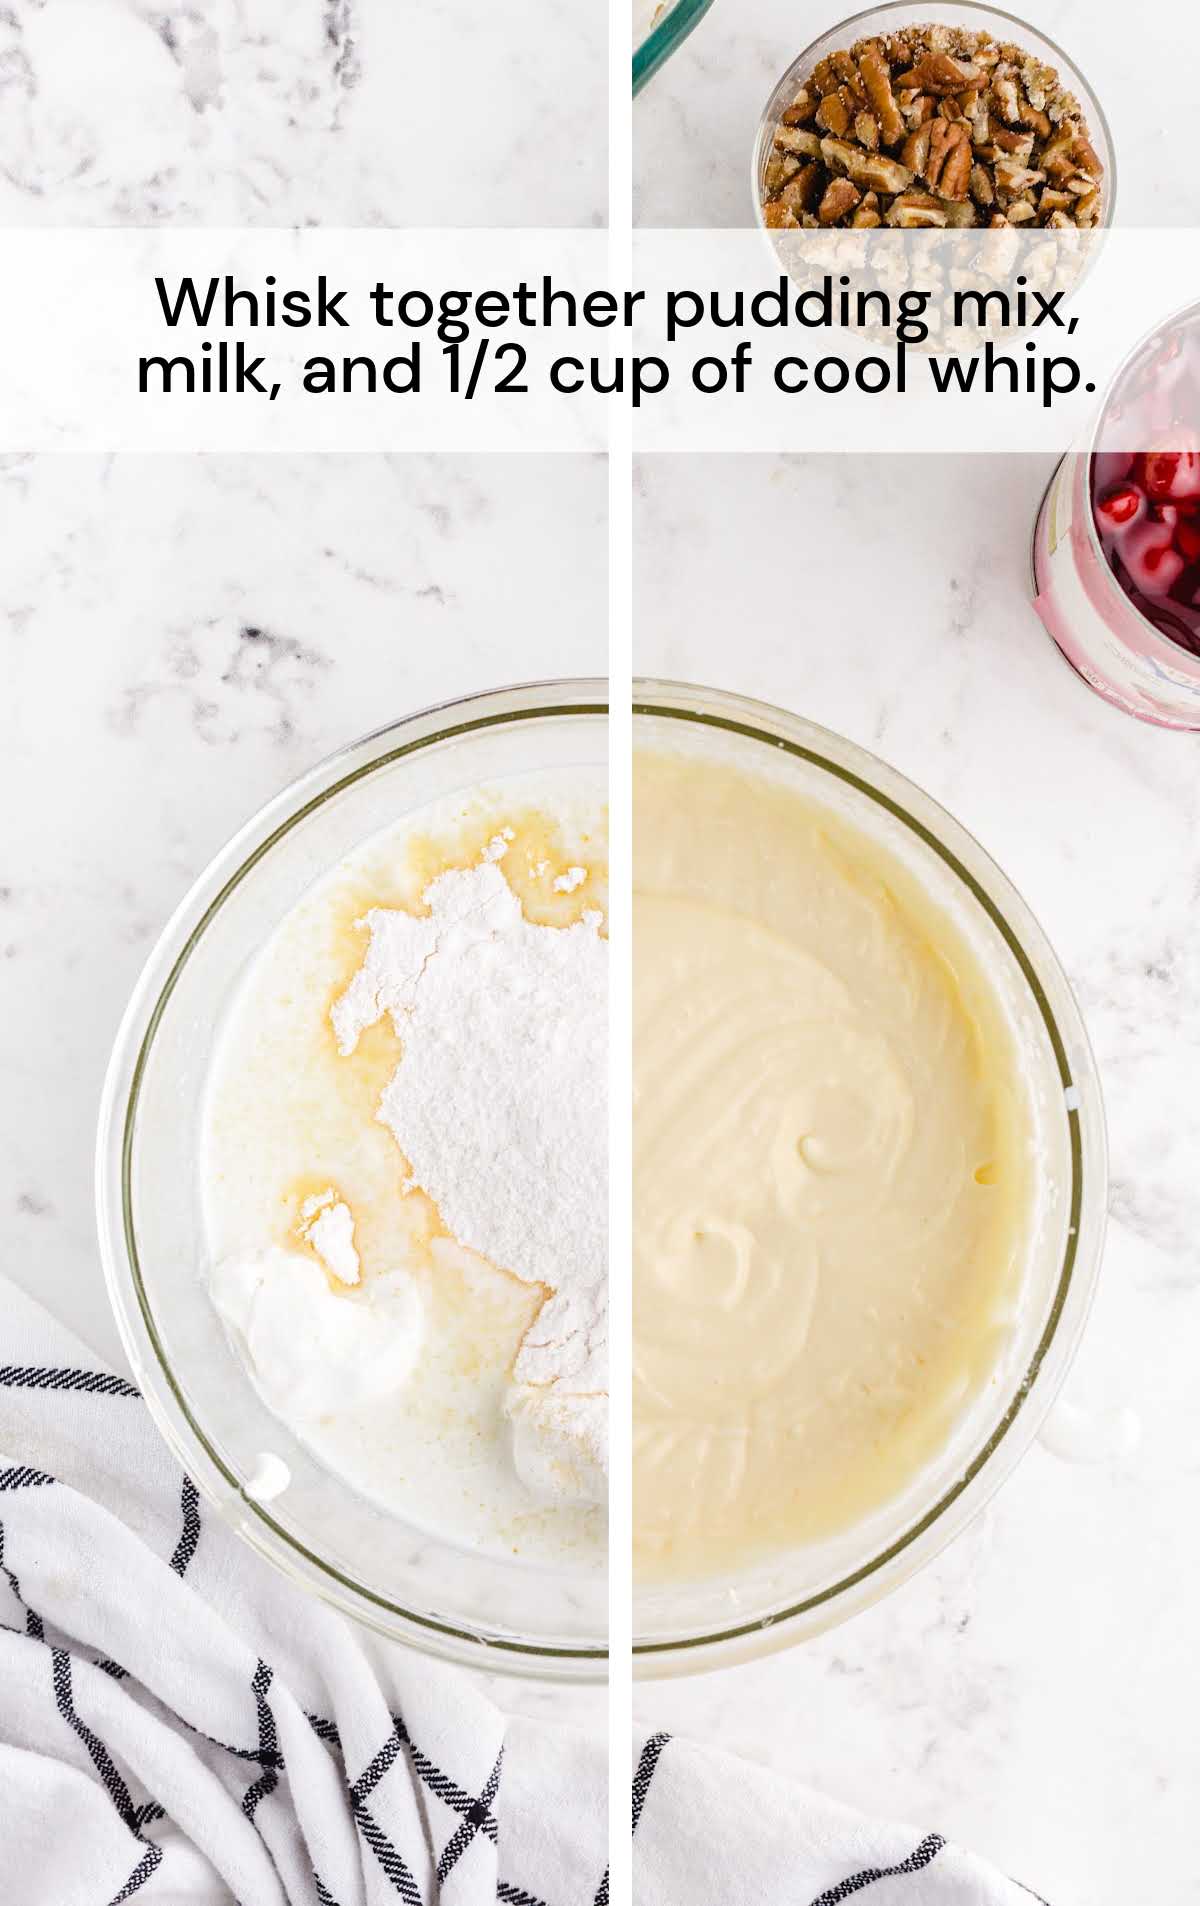 pudding milk and cool whip whisked together in a bowl